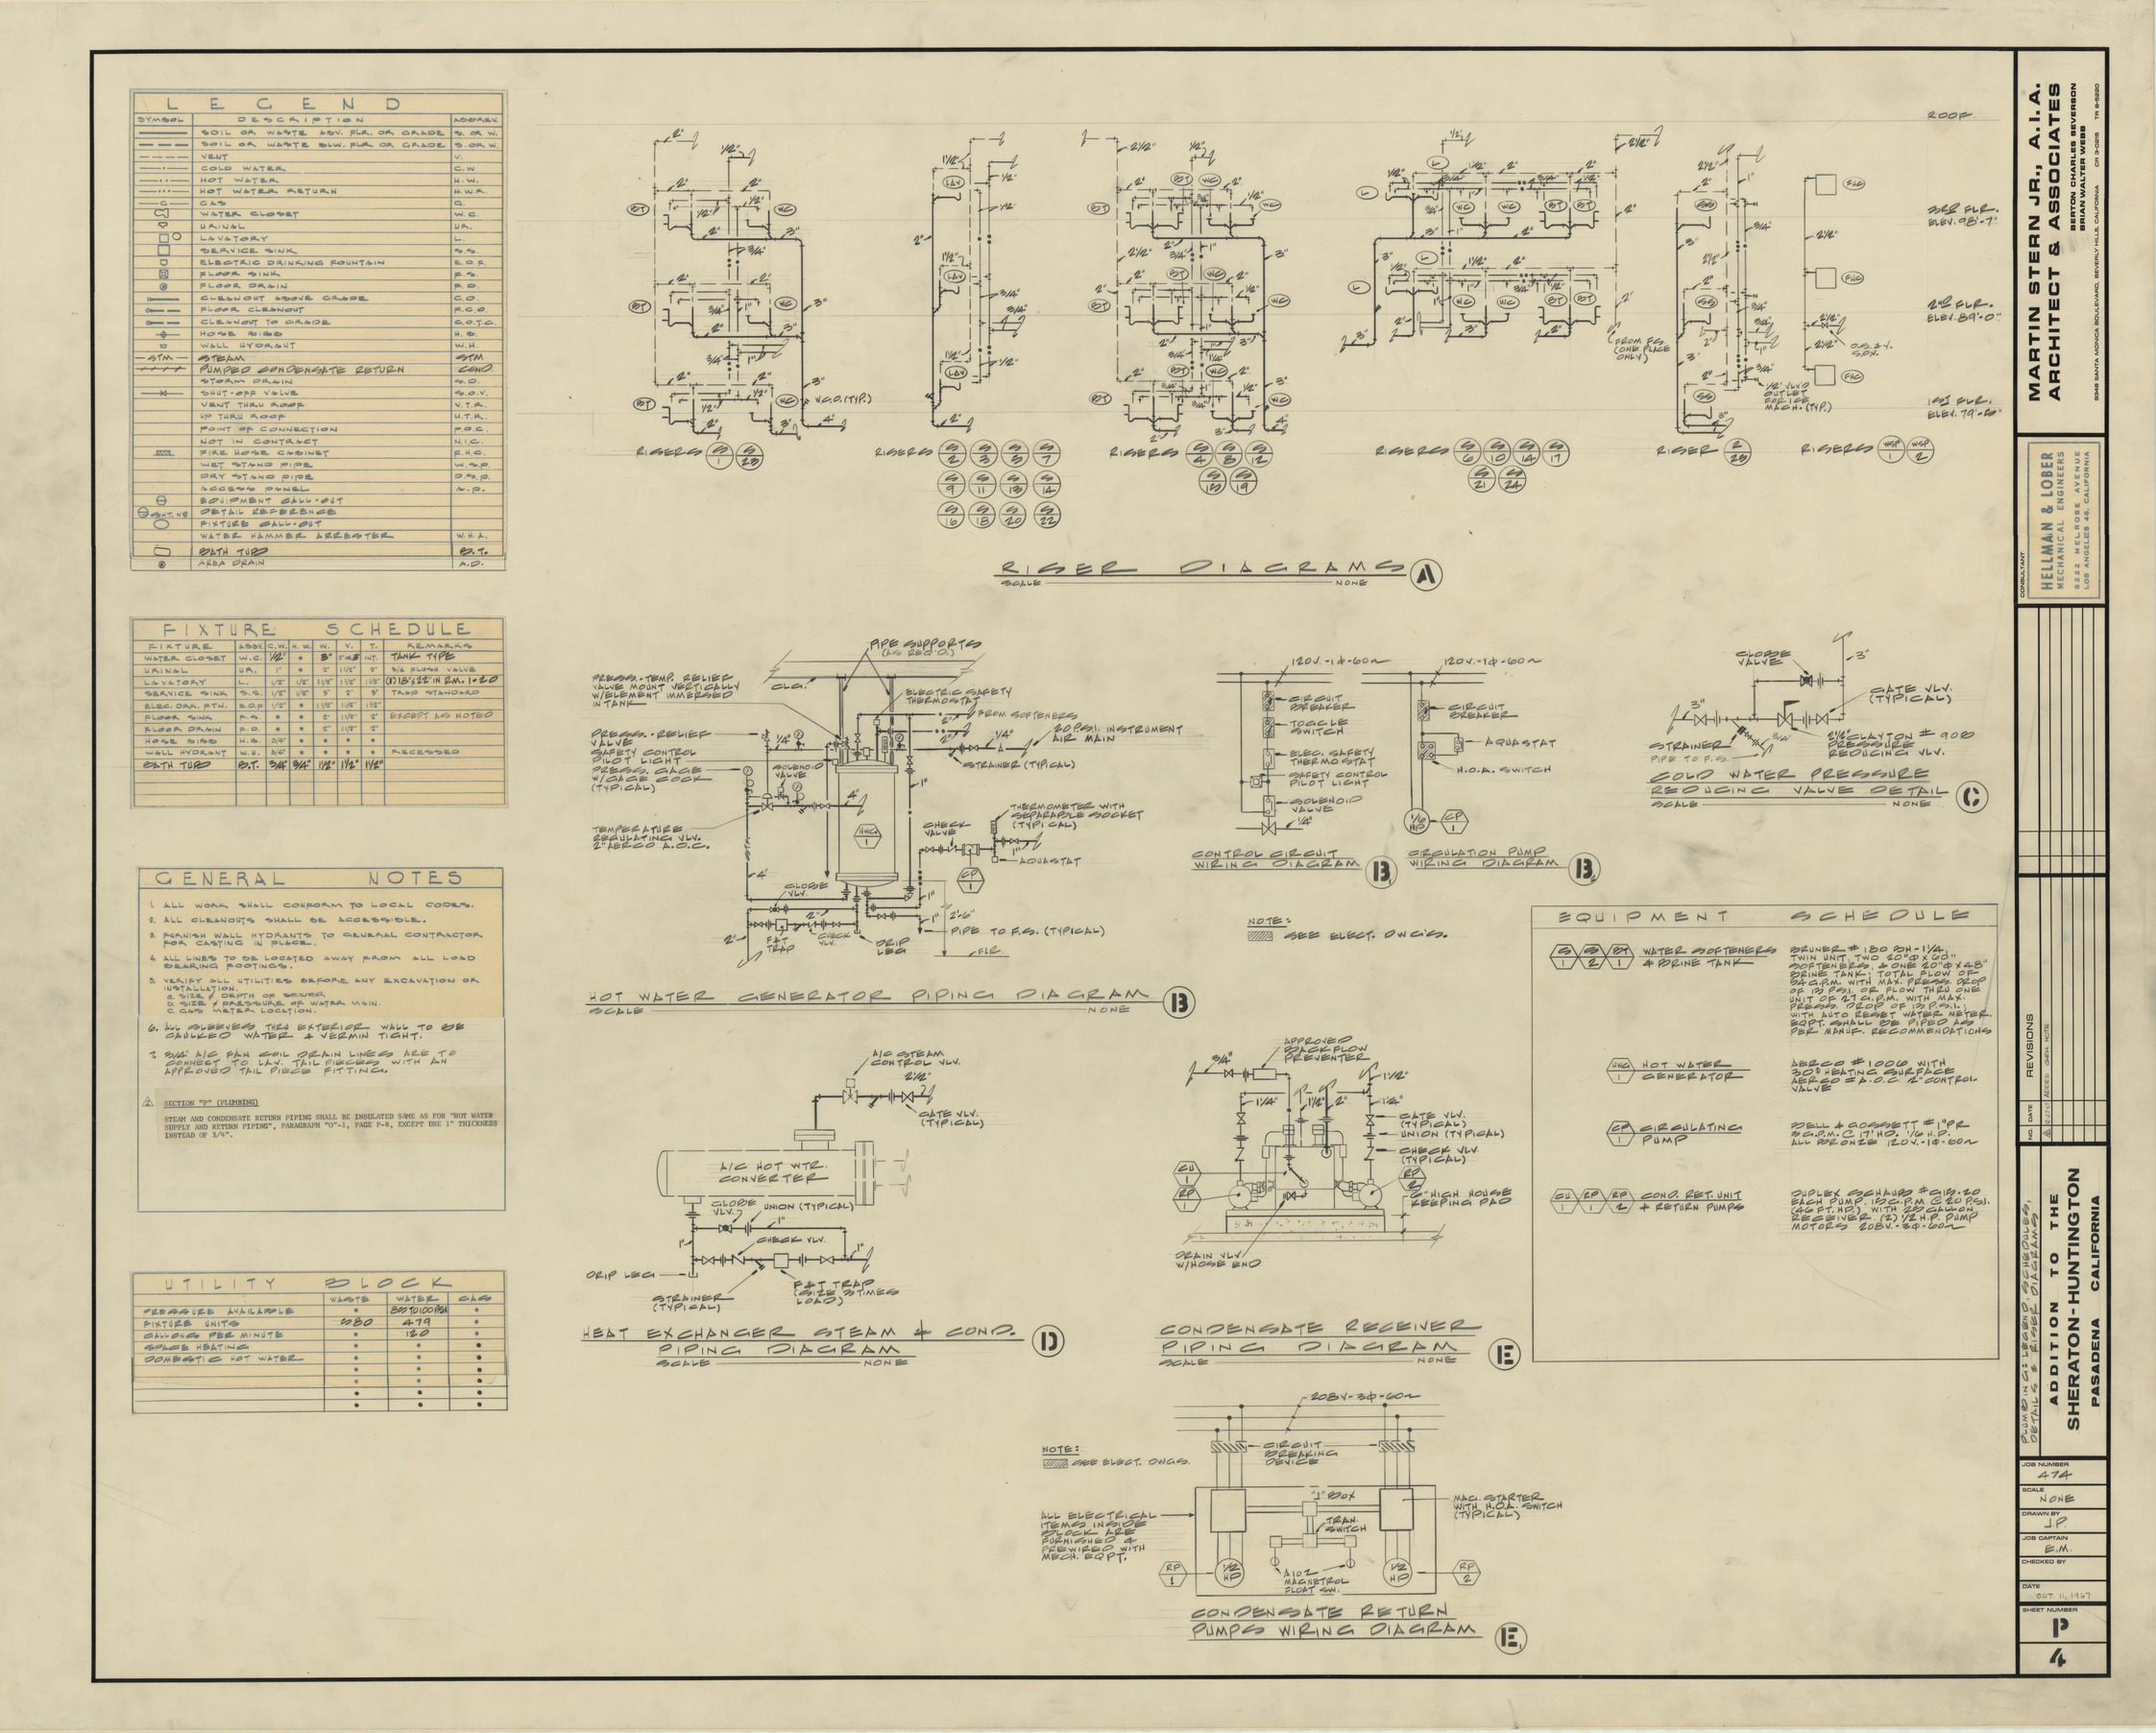 Huntington addition, architectural, electrical, mechanical, and plumbing: architectural drawings, image 027